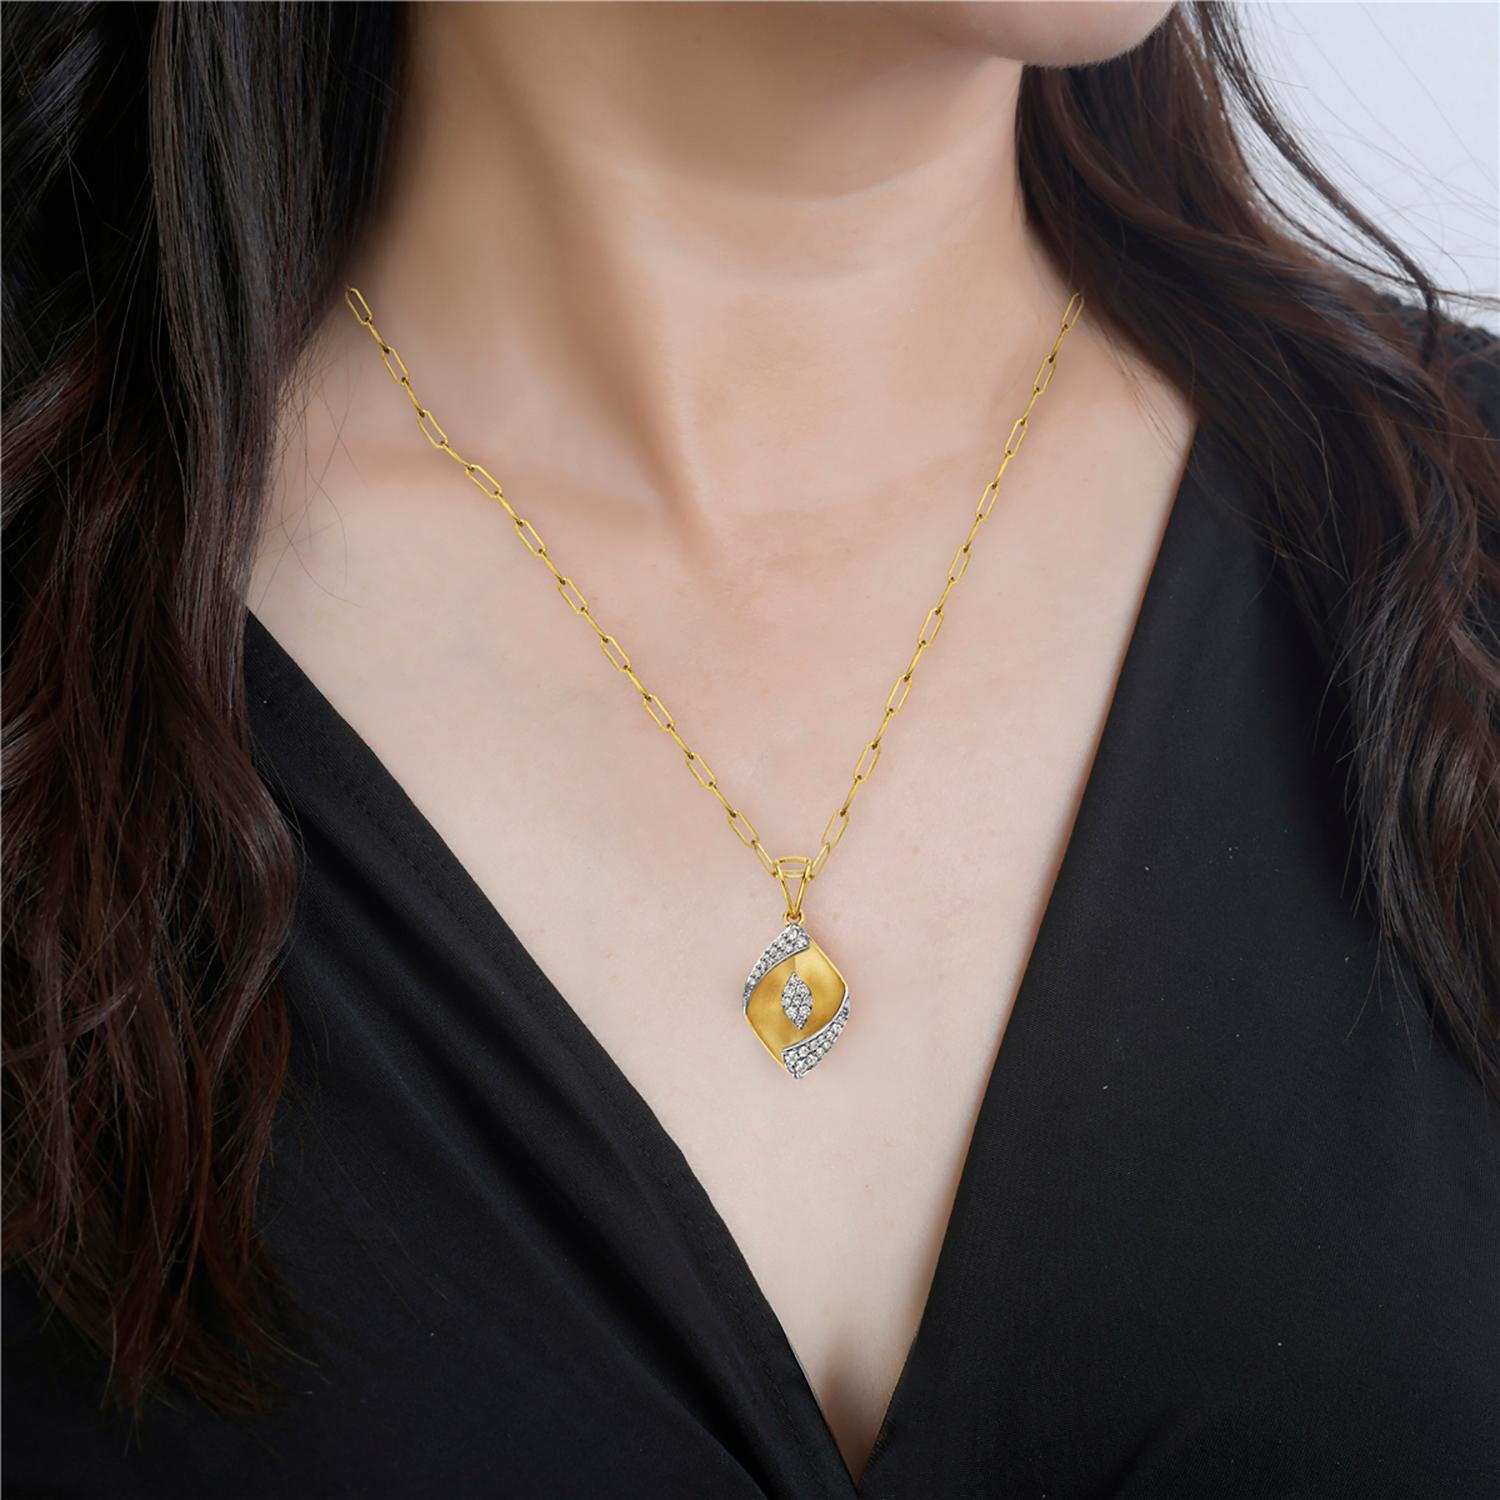 The pendant is made from high-quality 14k gold, giving it a luxurious and radiant shine. The petal design is intricately crafted, with a depth illusion that adds a touch of visual interest and texture to the piece.

14KT:4.171g,
Diamond:0.35ct